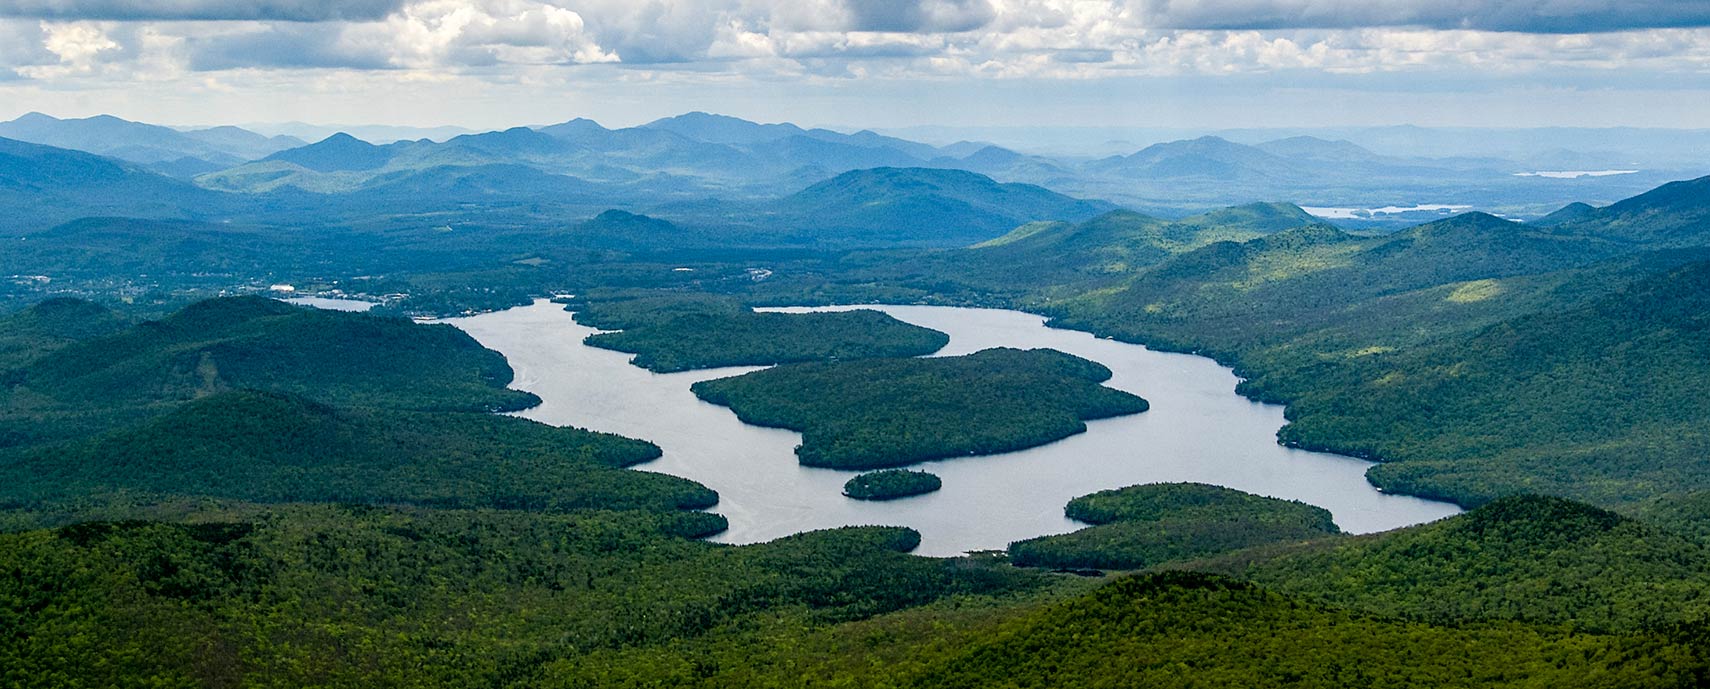 Lake Placid (lake) seen from the top of Whiteface Mountain, State of New York